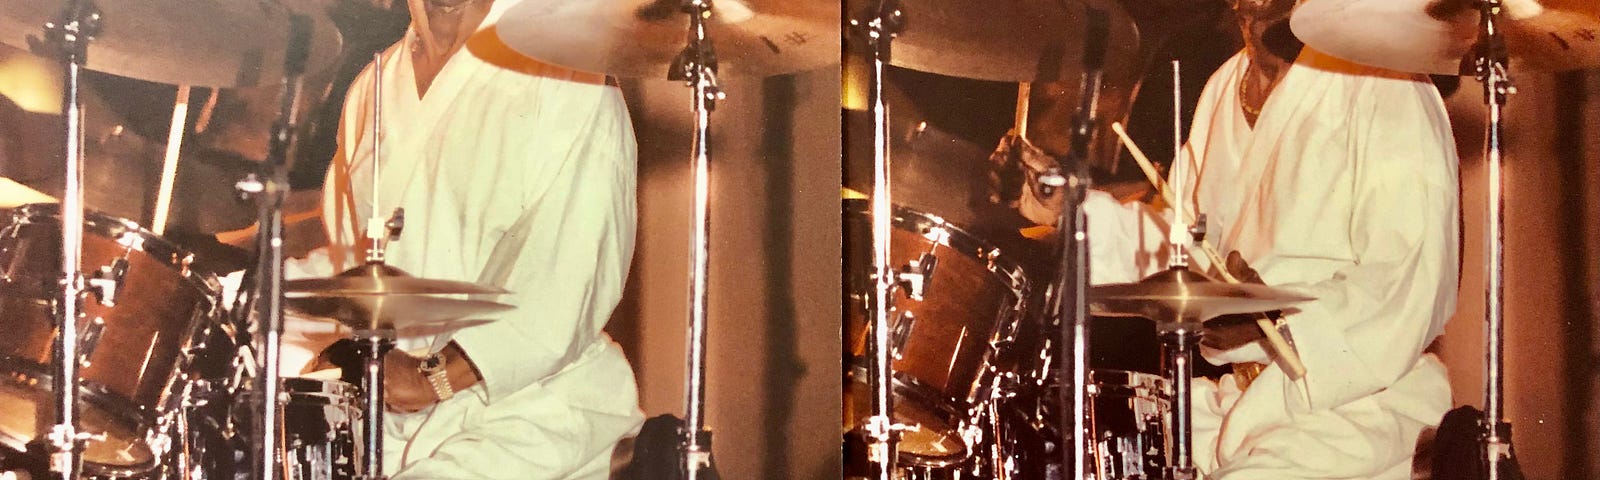 Two photos of Art Blakey playing his drums in an concert at Peabody Alley. Taken by the author — Blakey is dressed in all white and is making faces at the audience!